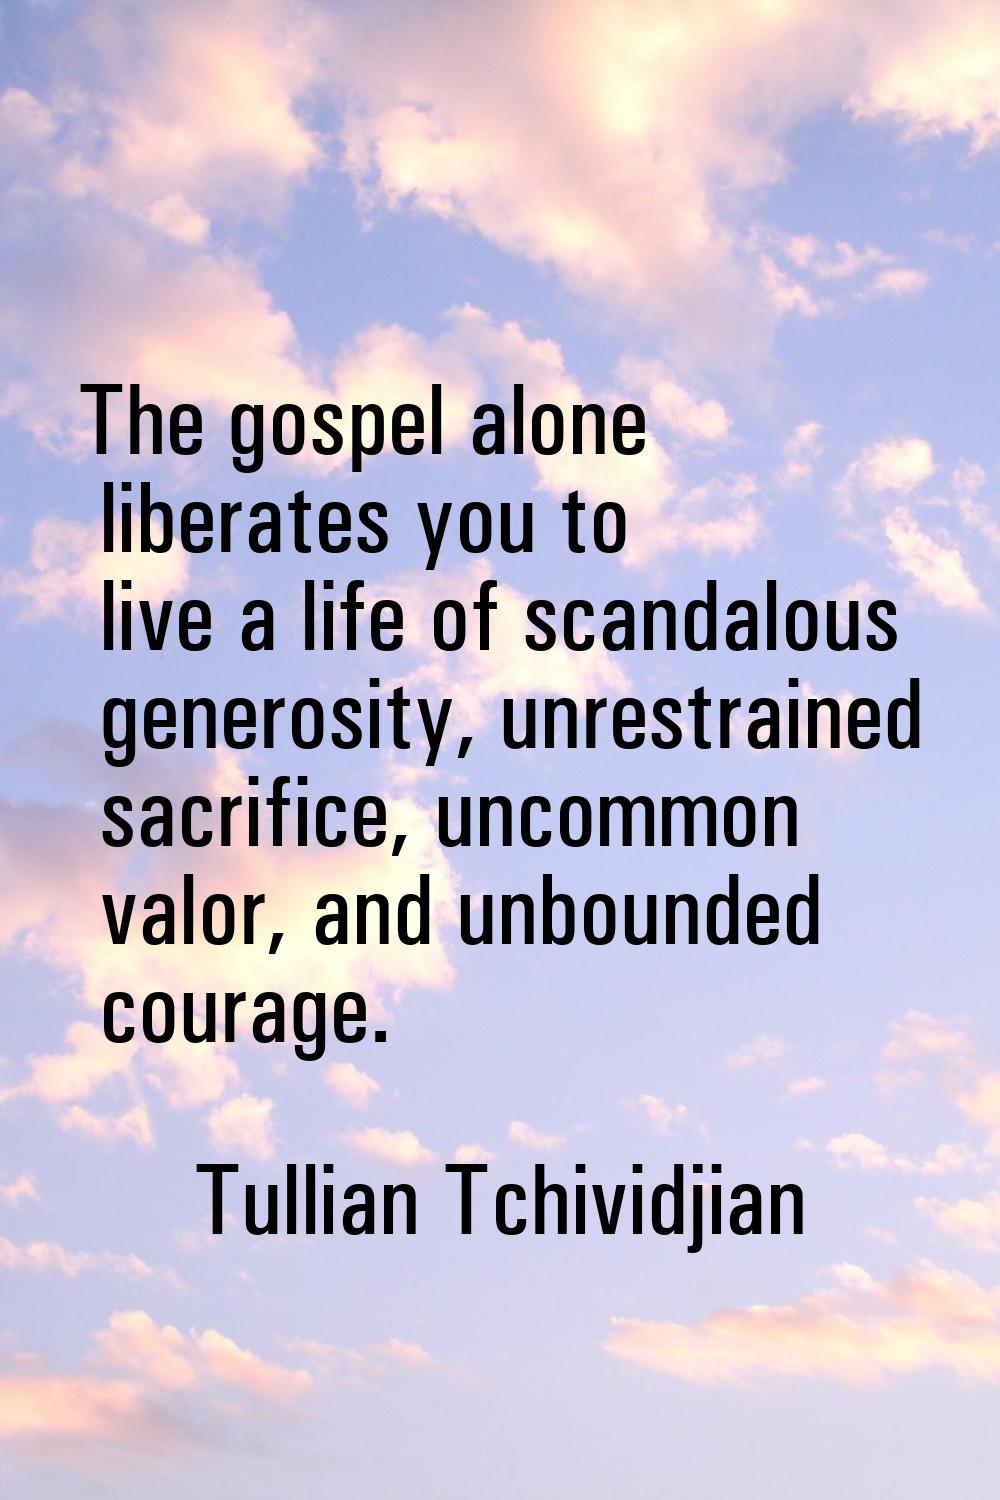 The gospel alone liberates you to live a life of scandalous generosity, unrestrained sacrifice, unc